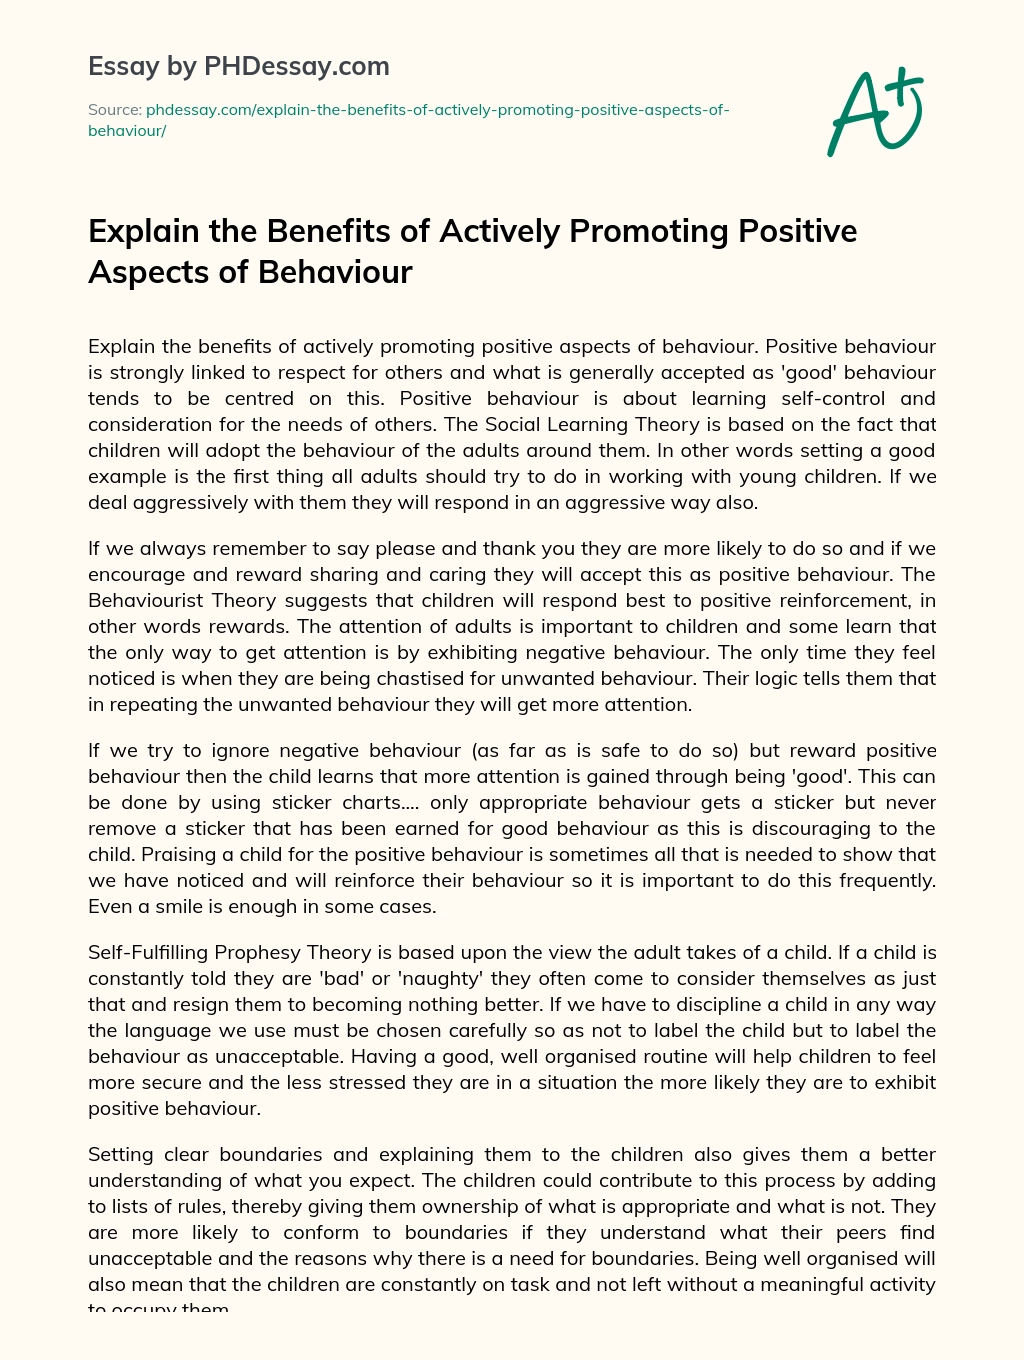 Explain the Benefits of Actively Promoting Positive Aspects of Behaviour essay